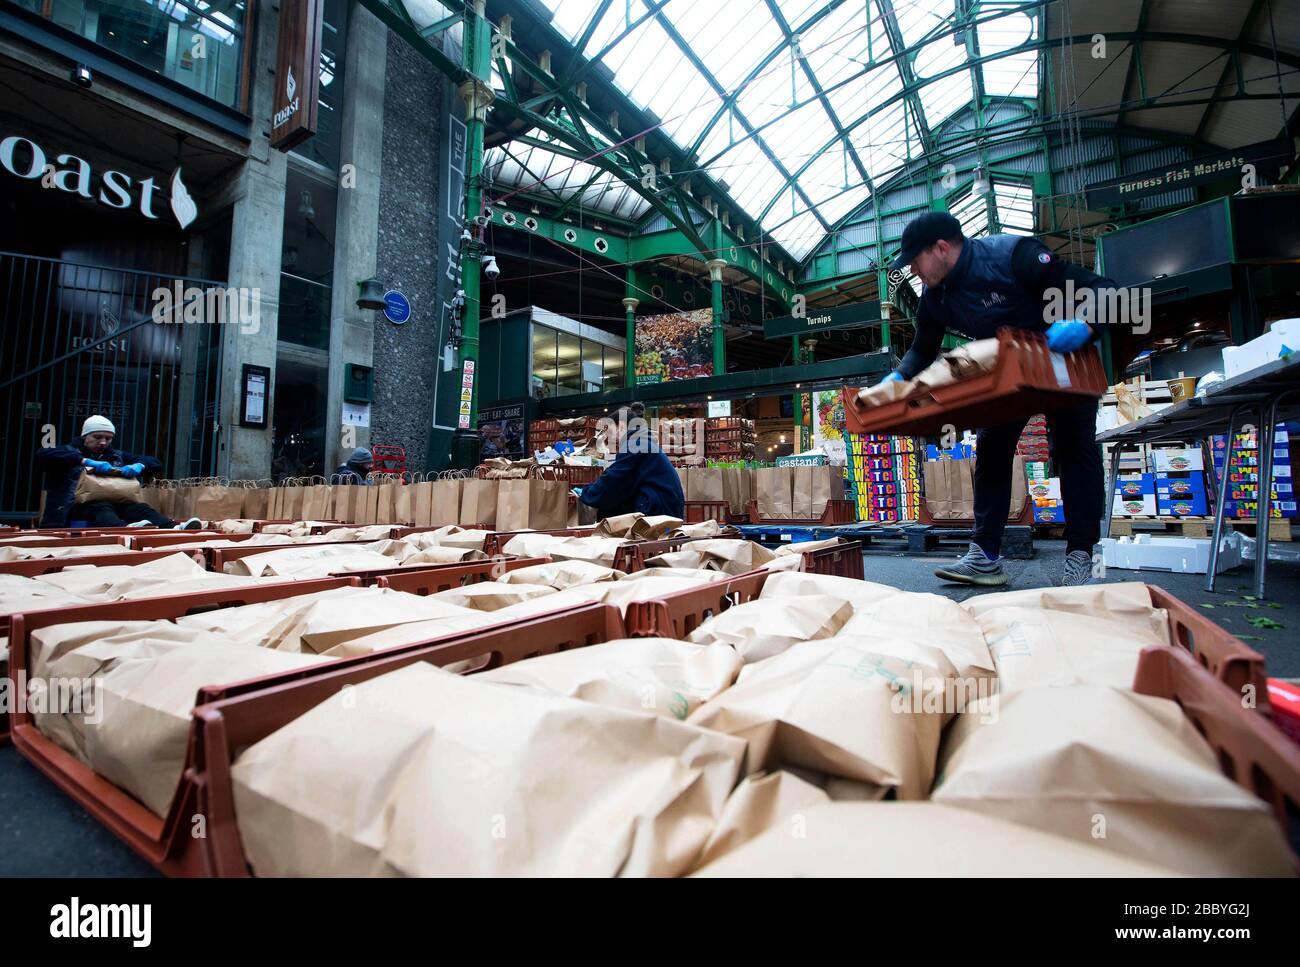 Volunteers prepare some of the thousand fruit and vegetable packages destined for healthcare workers fighting the COVID-19 pandemic as Borough Market spearheads the national â€˜Feed The Frontlineâ€™ campaign, London. Stock Photo